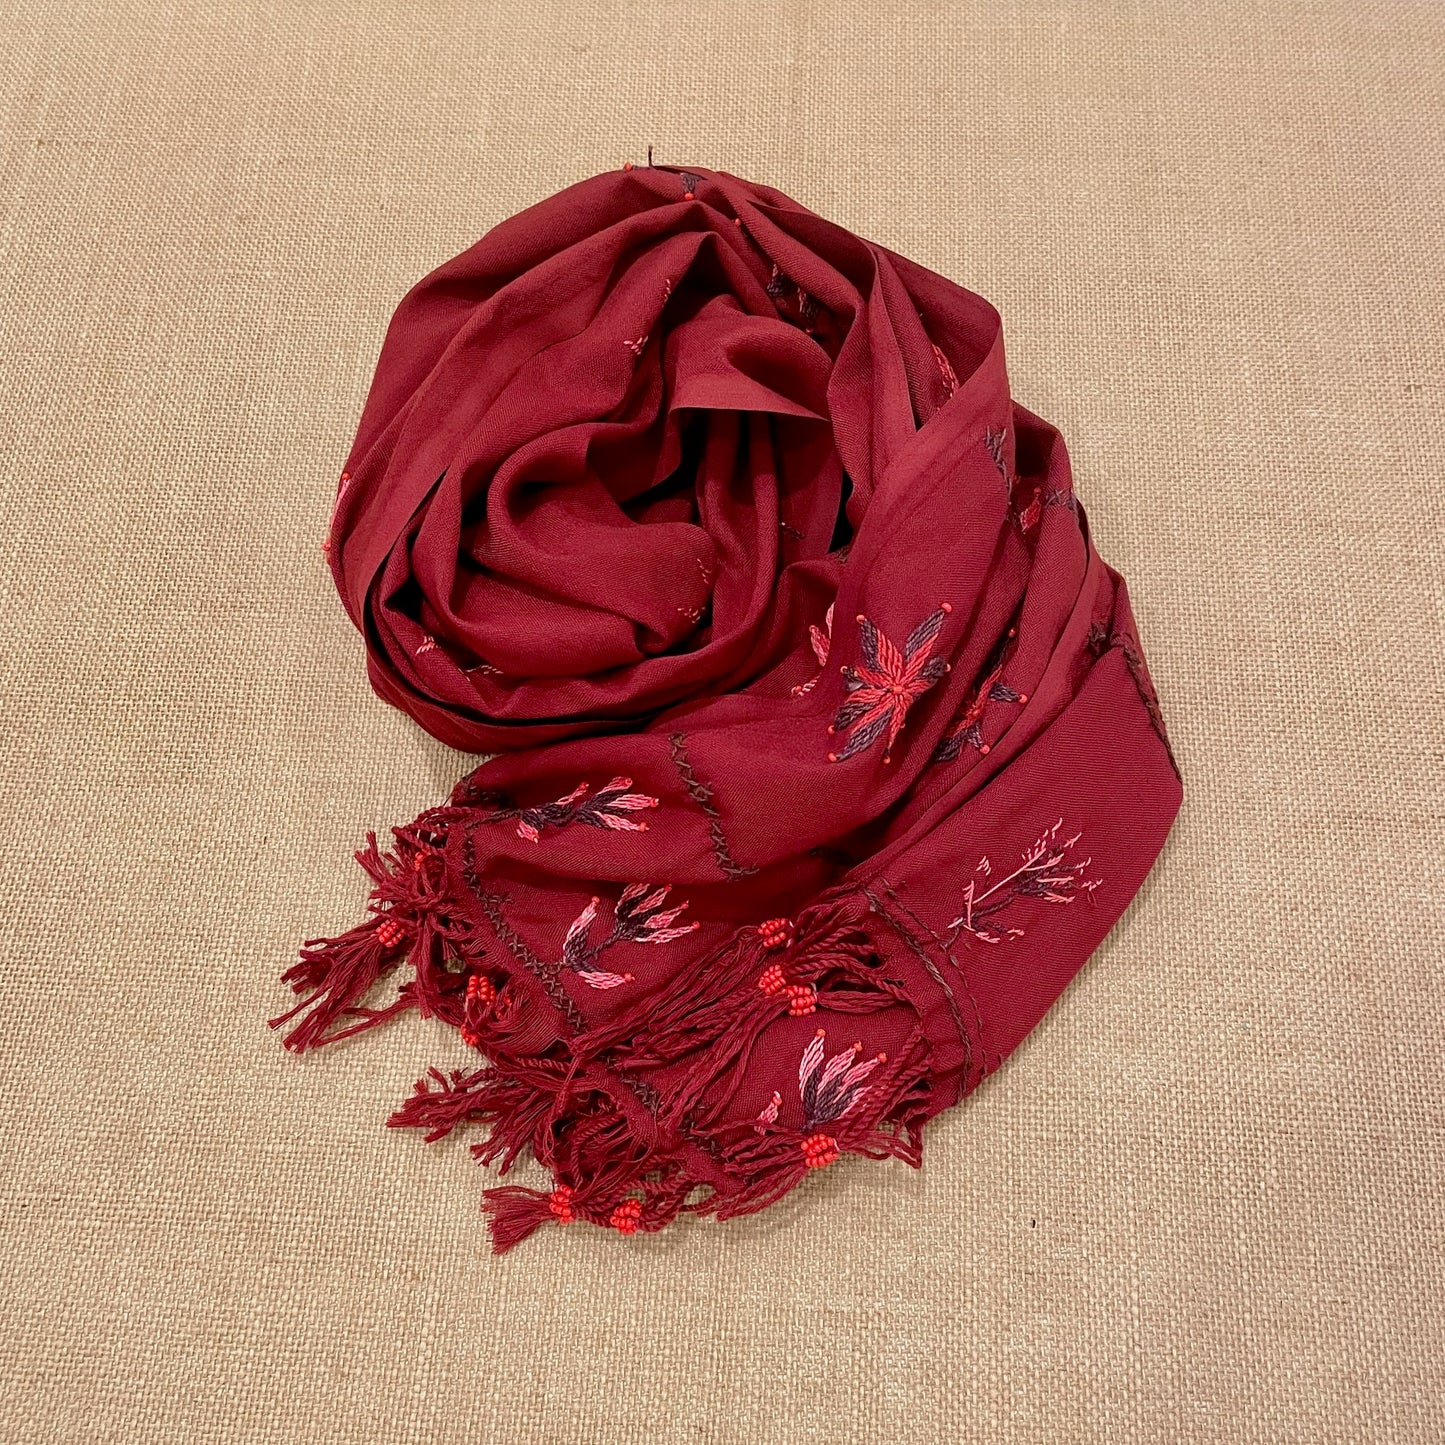 Bedouin Hand-embroidered Maroon Pashmina Scarf